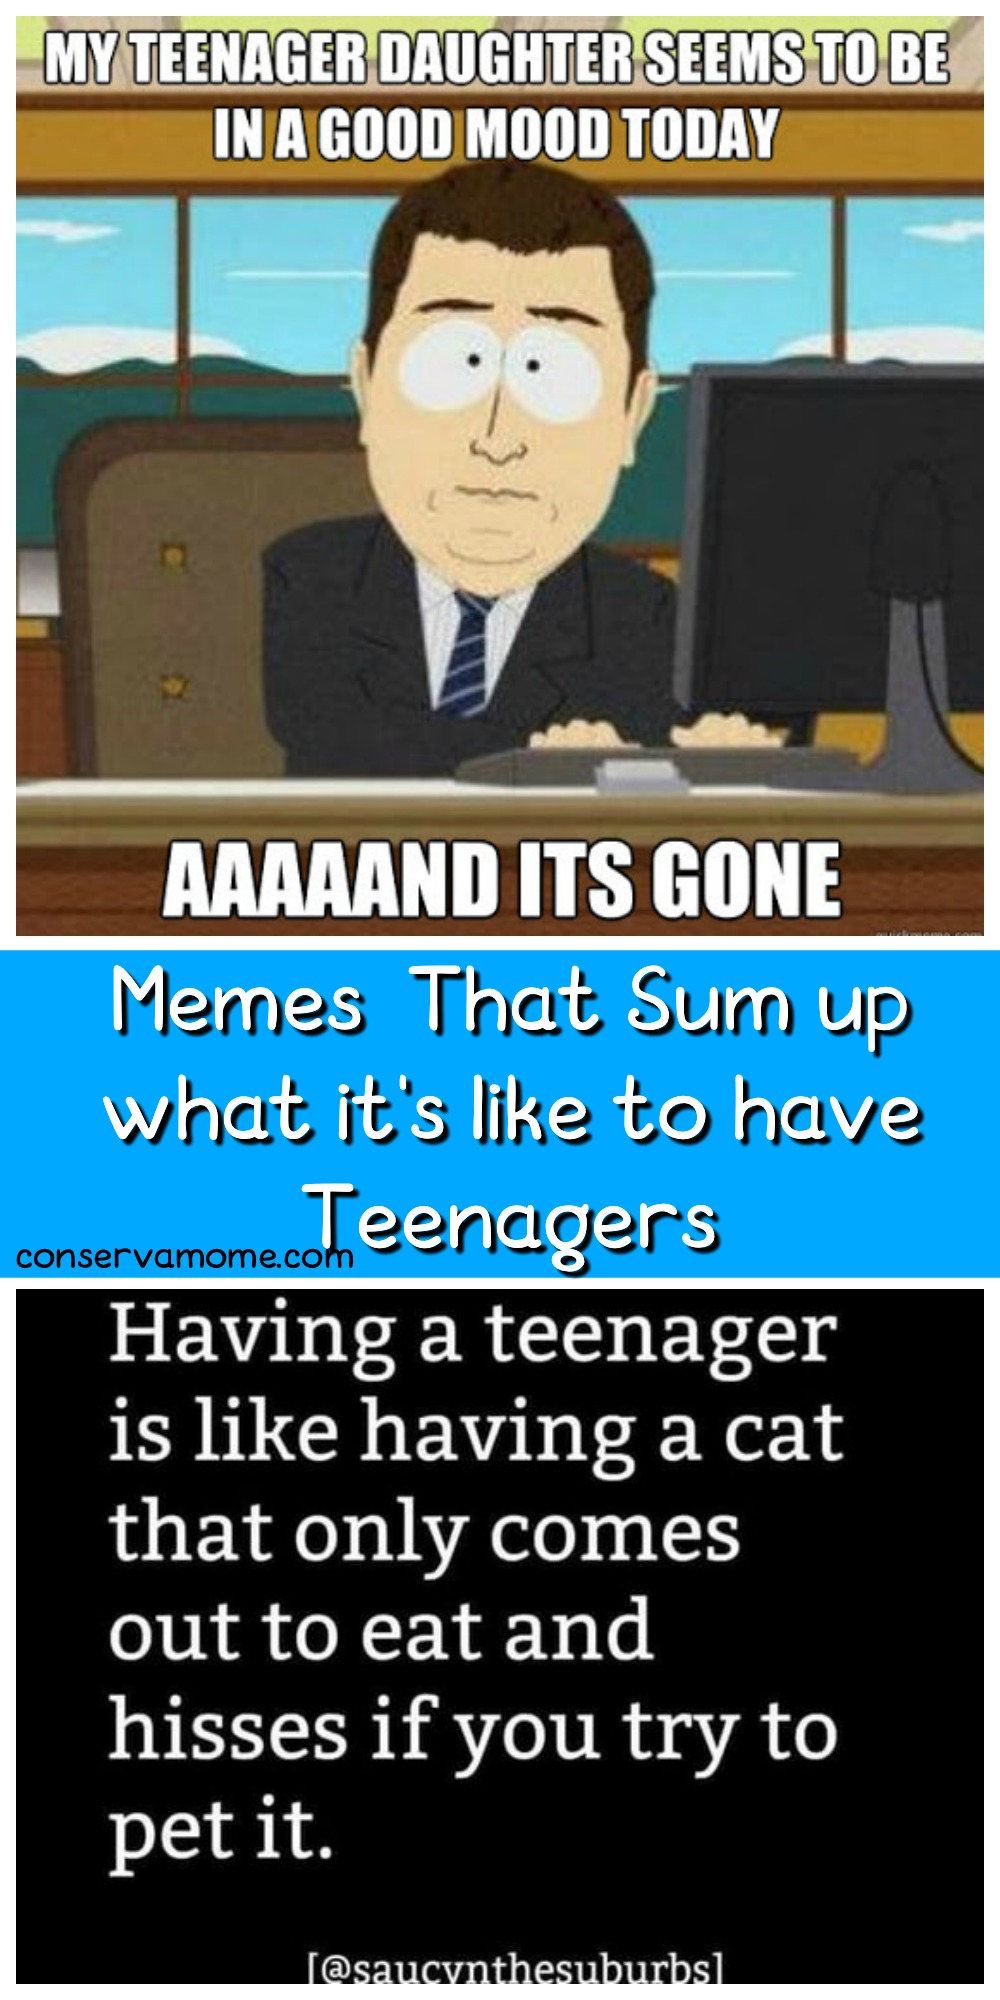 Memes that sum up what it's like to have teenagers